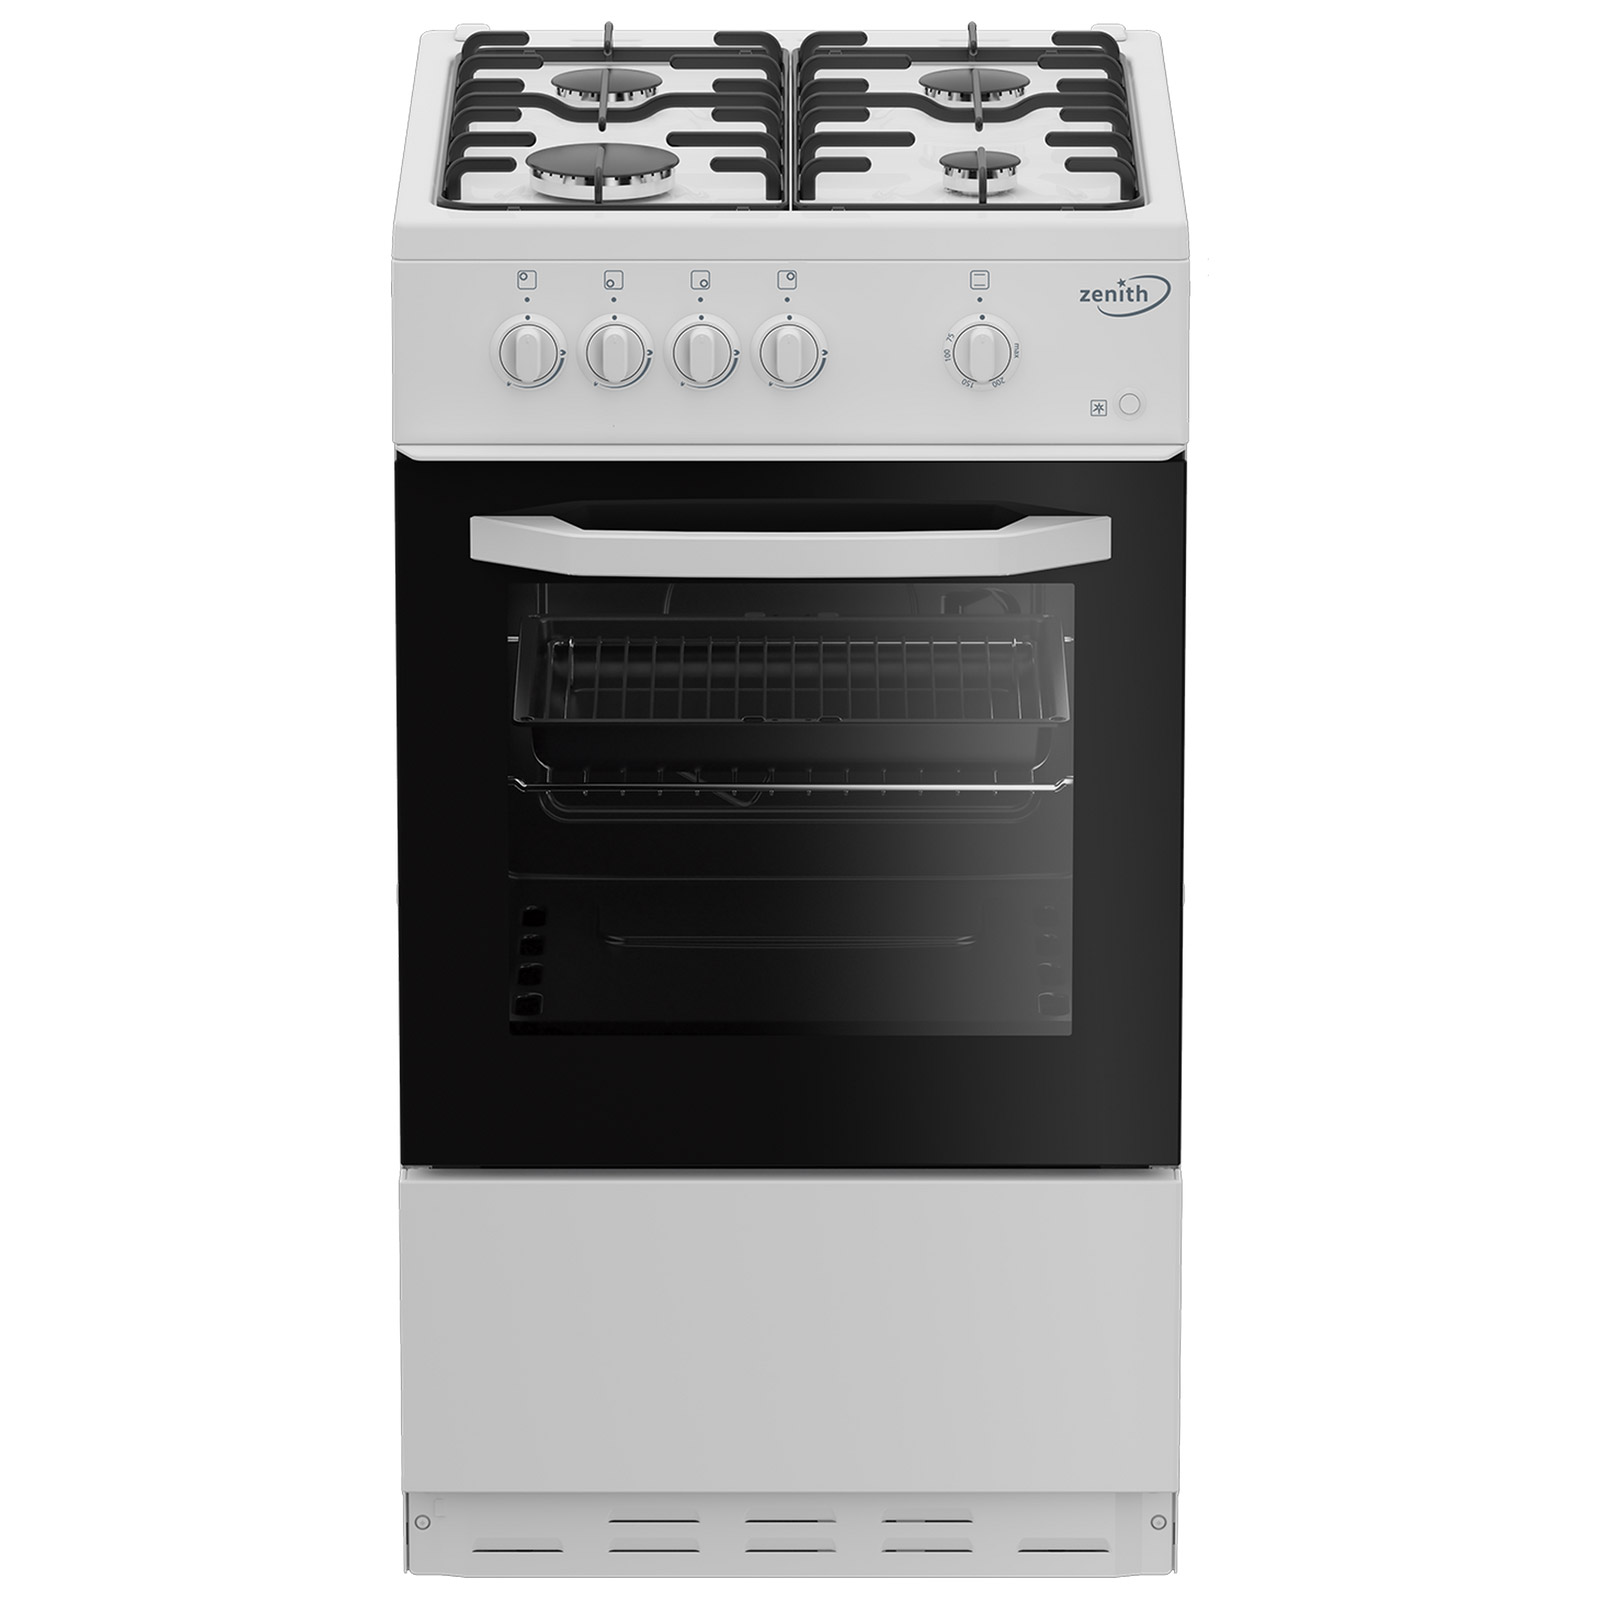 Image of Zenith ZE501W 50cm Single Oven Gas Cooker in White 55 Litre